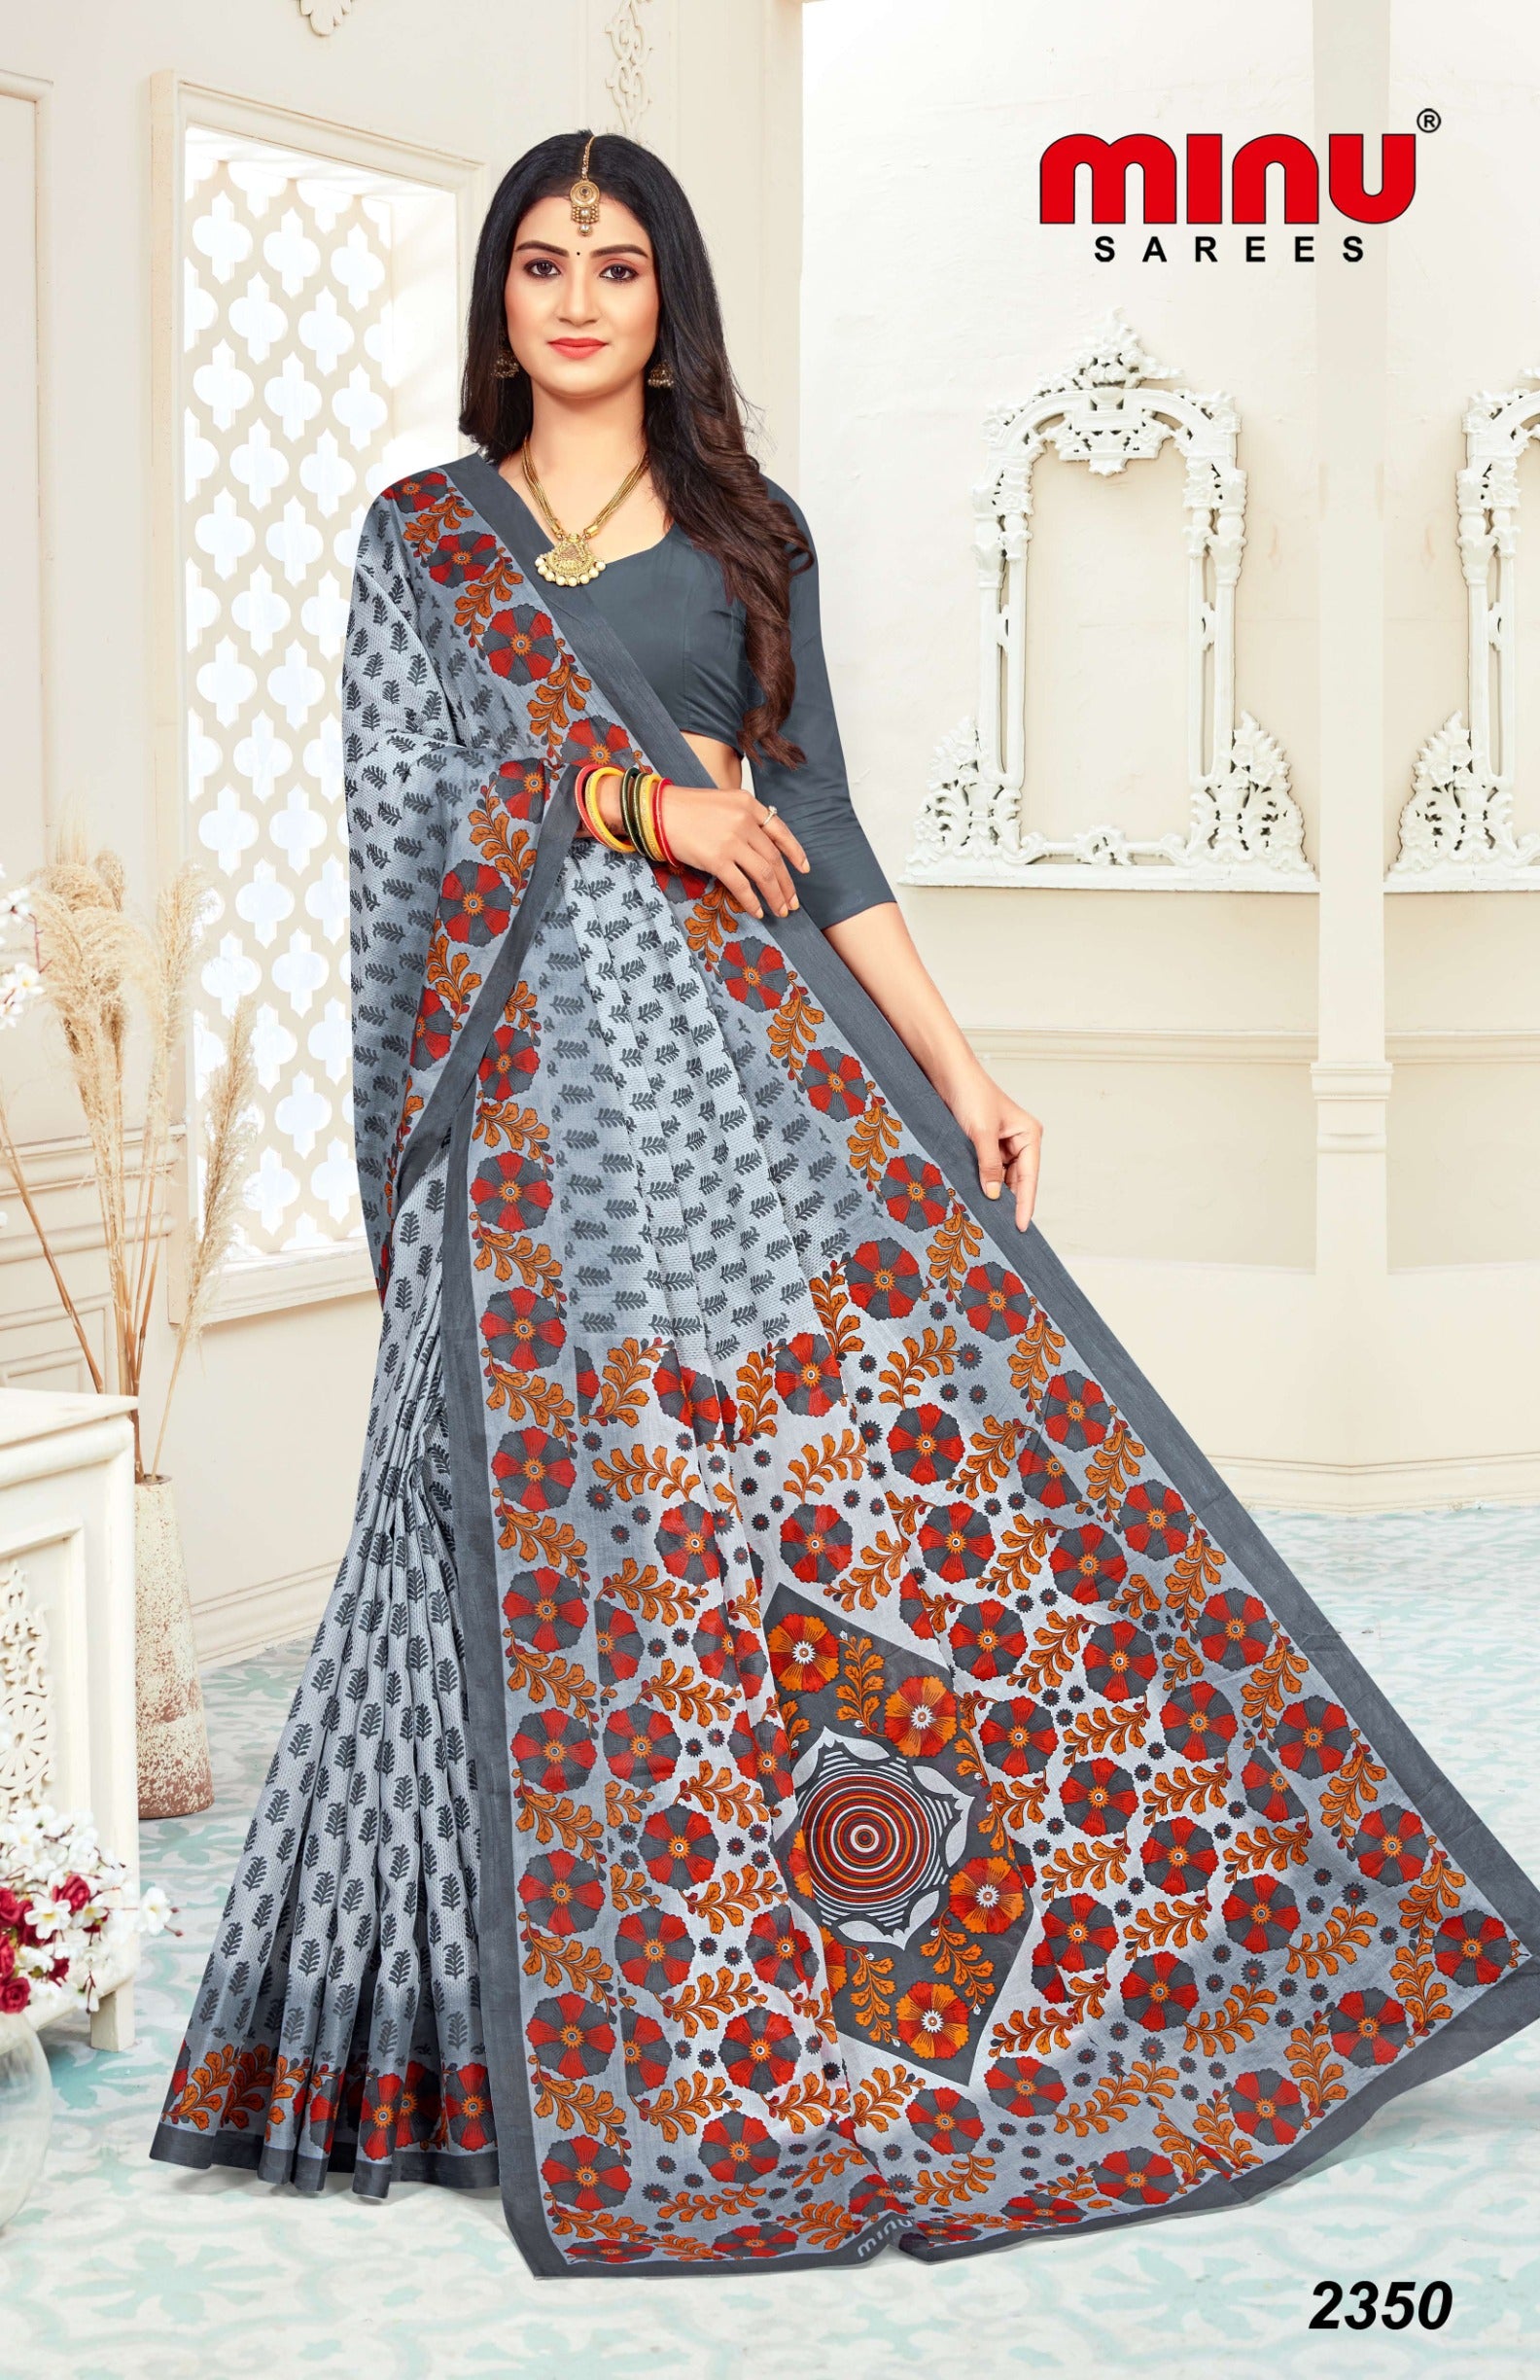 Color printed cotton saree for wholesalers and retailers